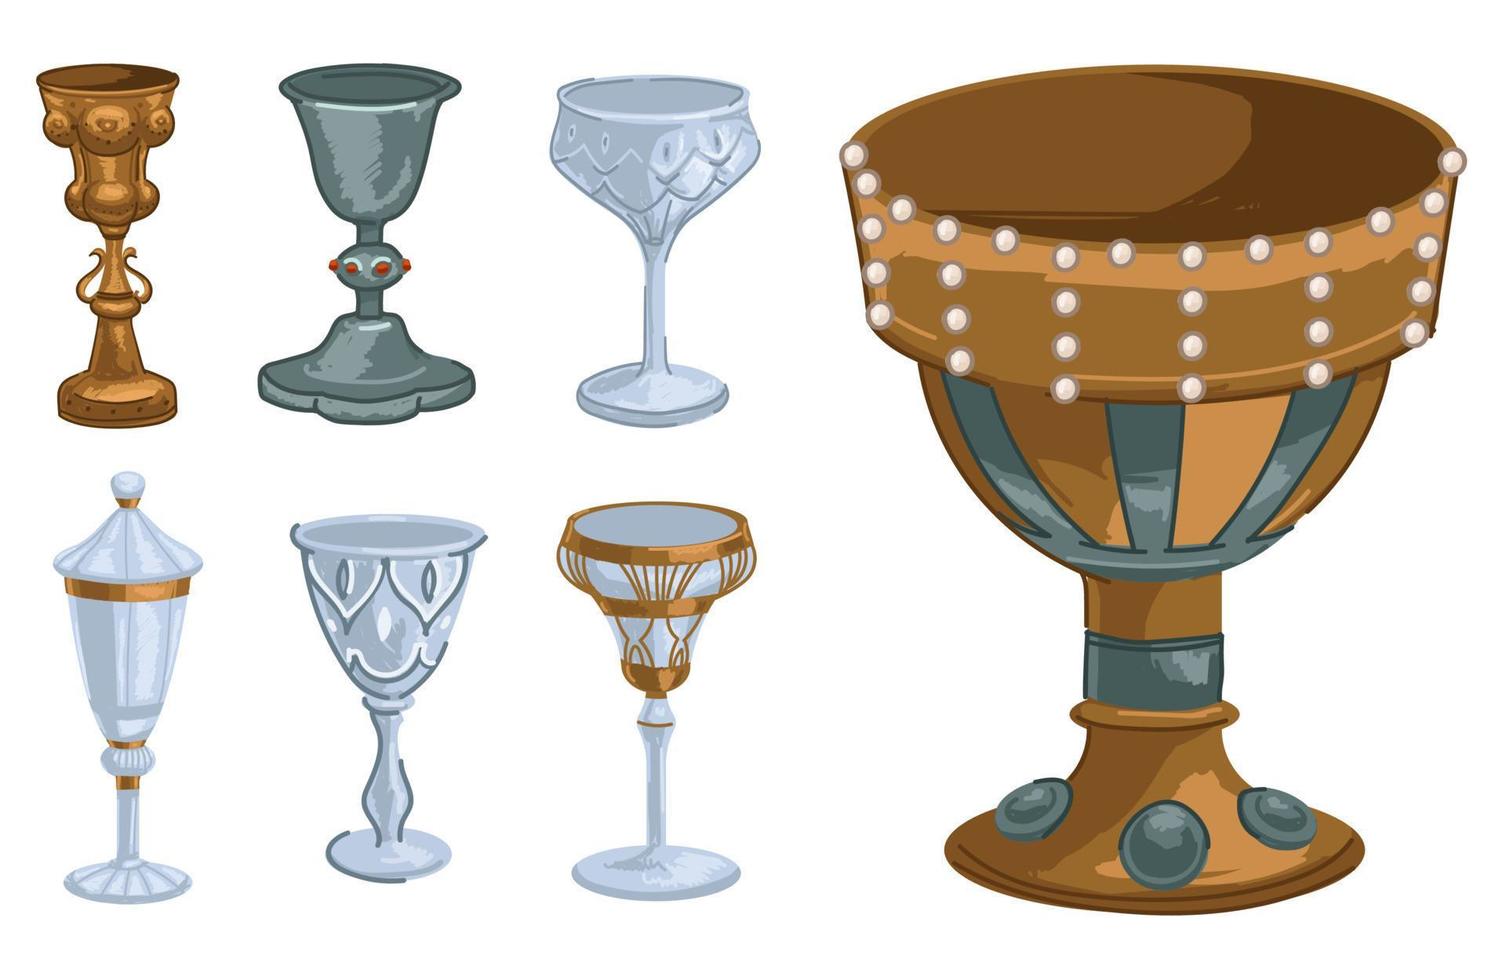 Goblet of gold and glass, decorated cups and mugs vector